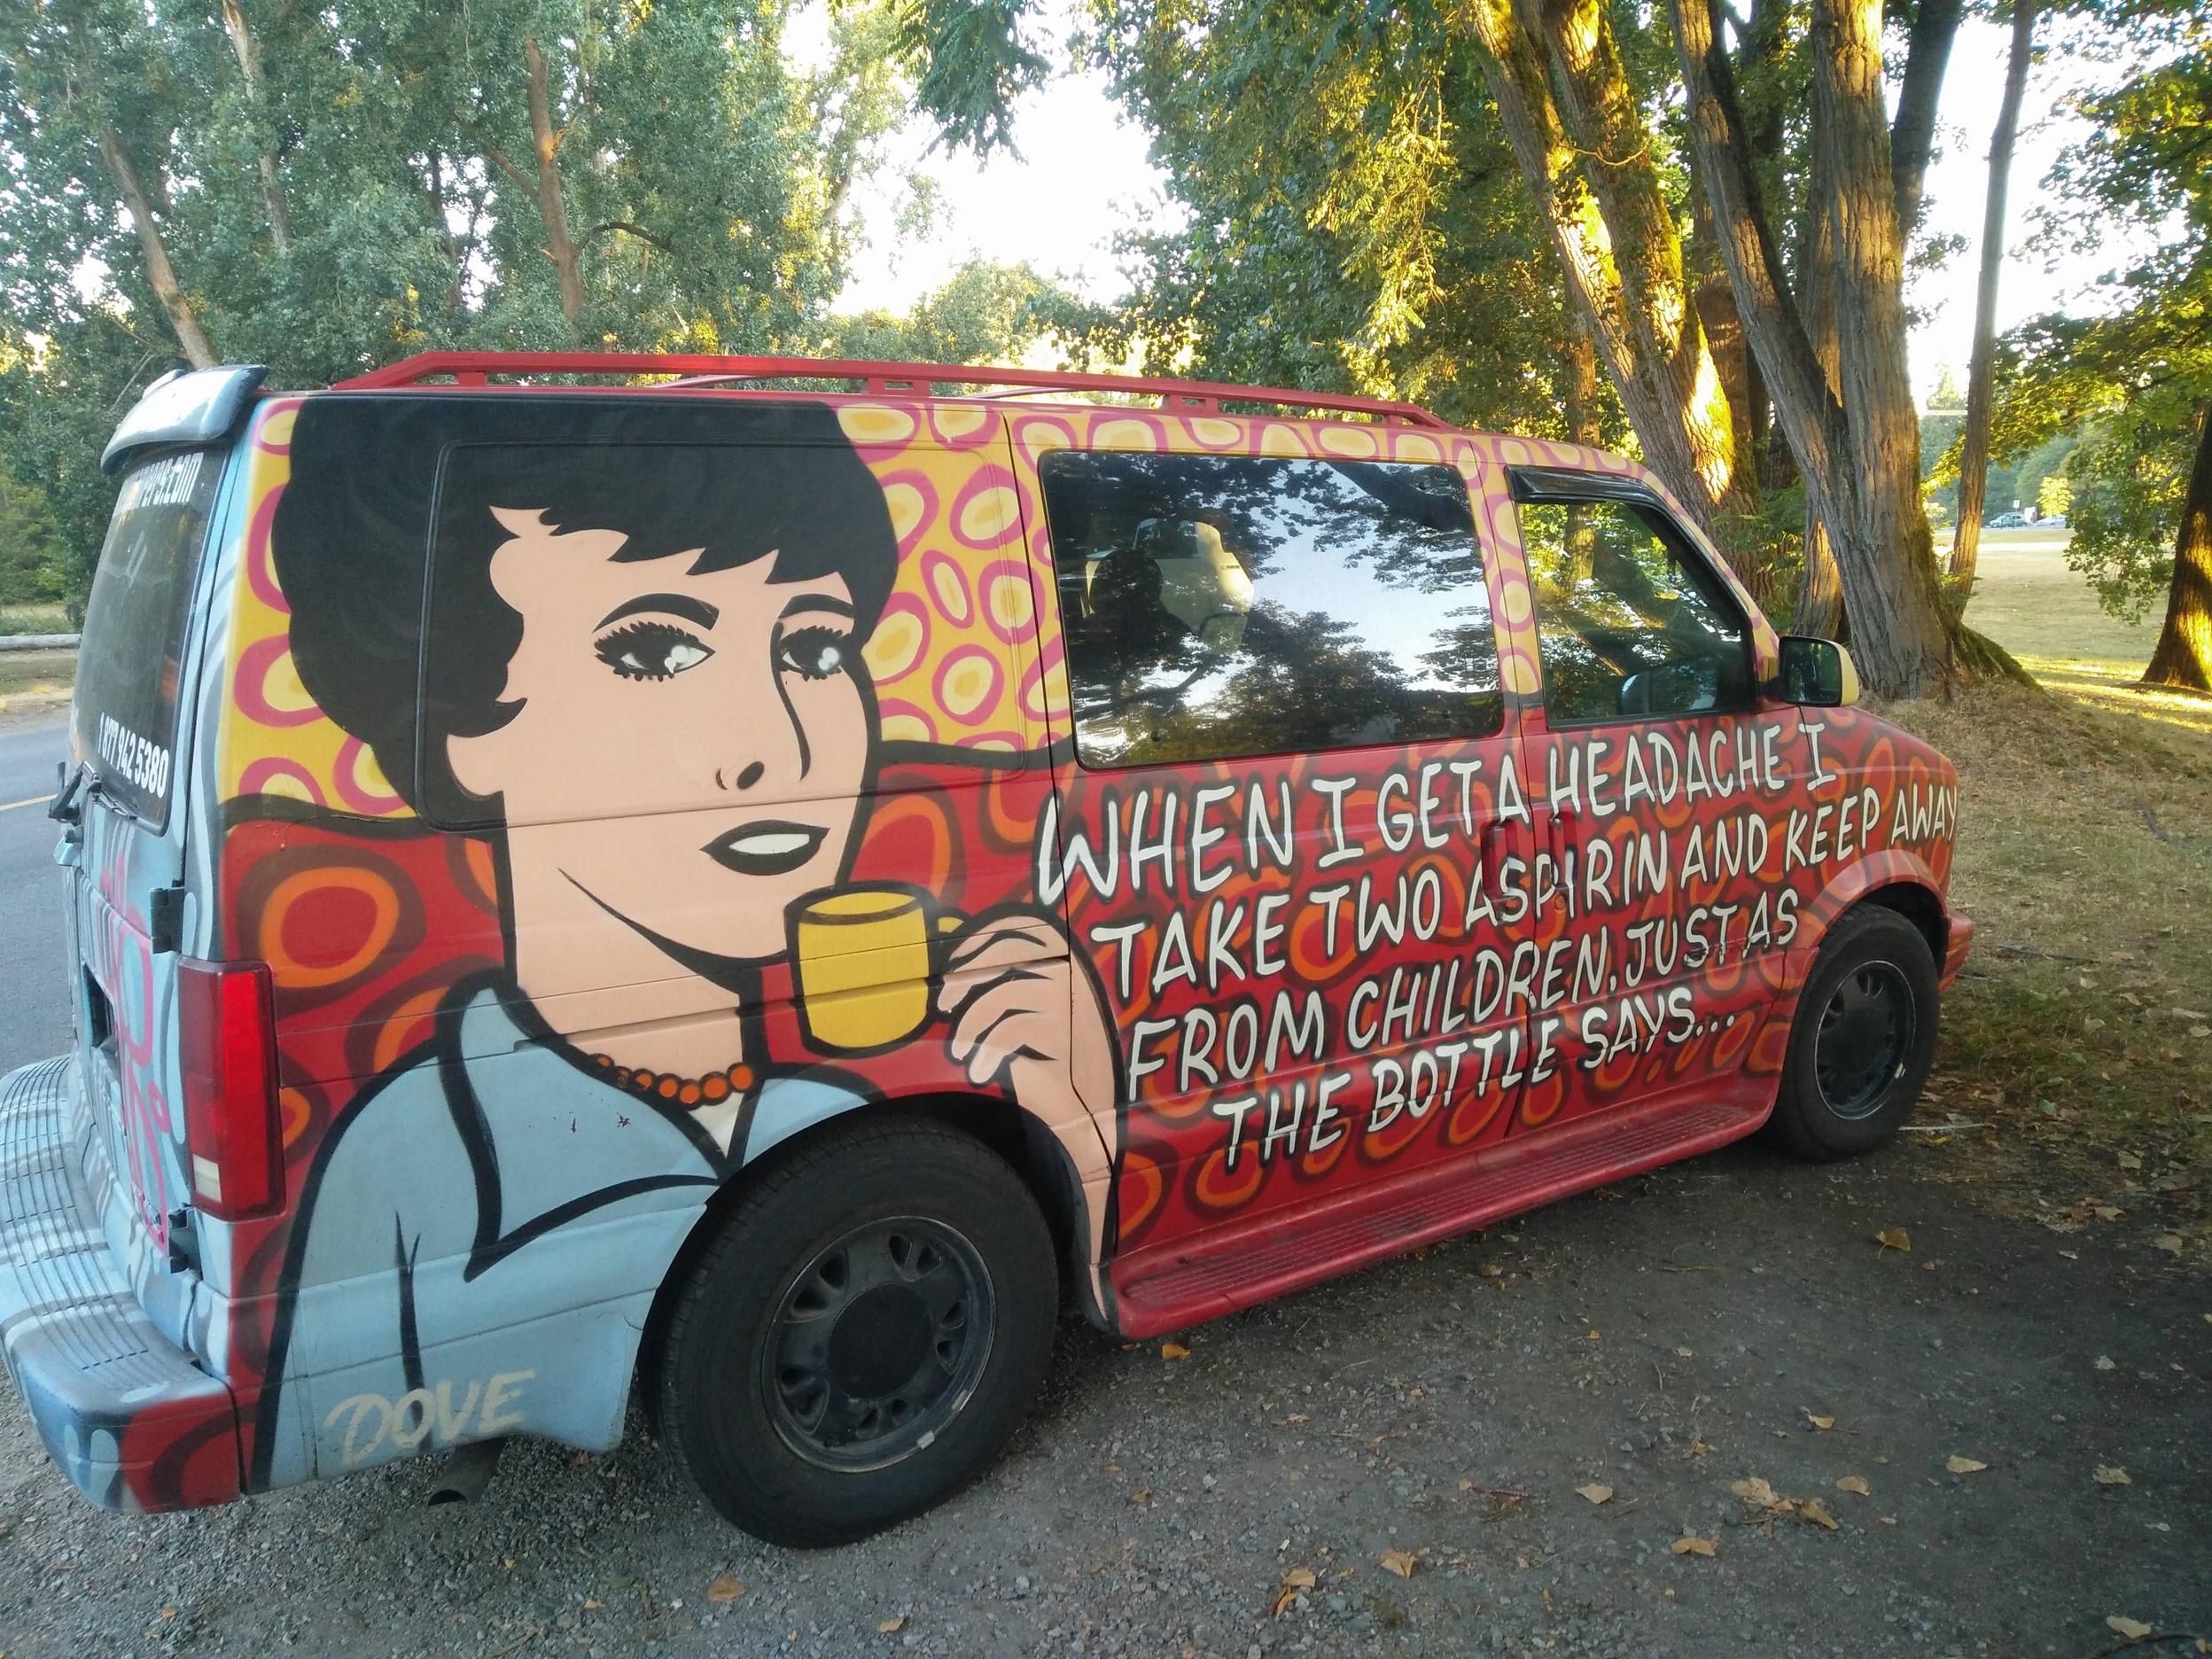 Spotted this cool van on a morning walk